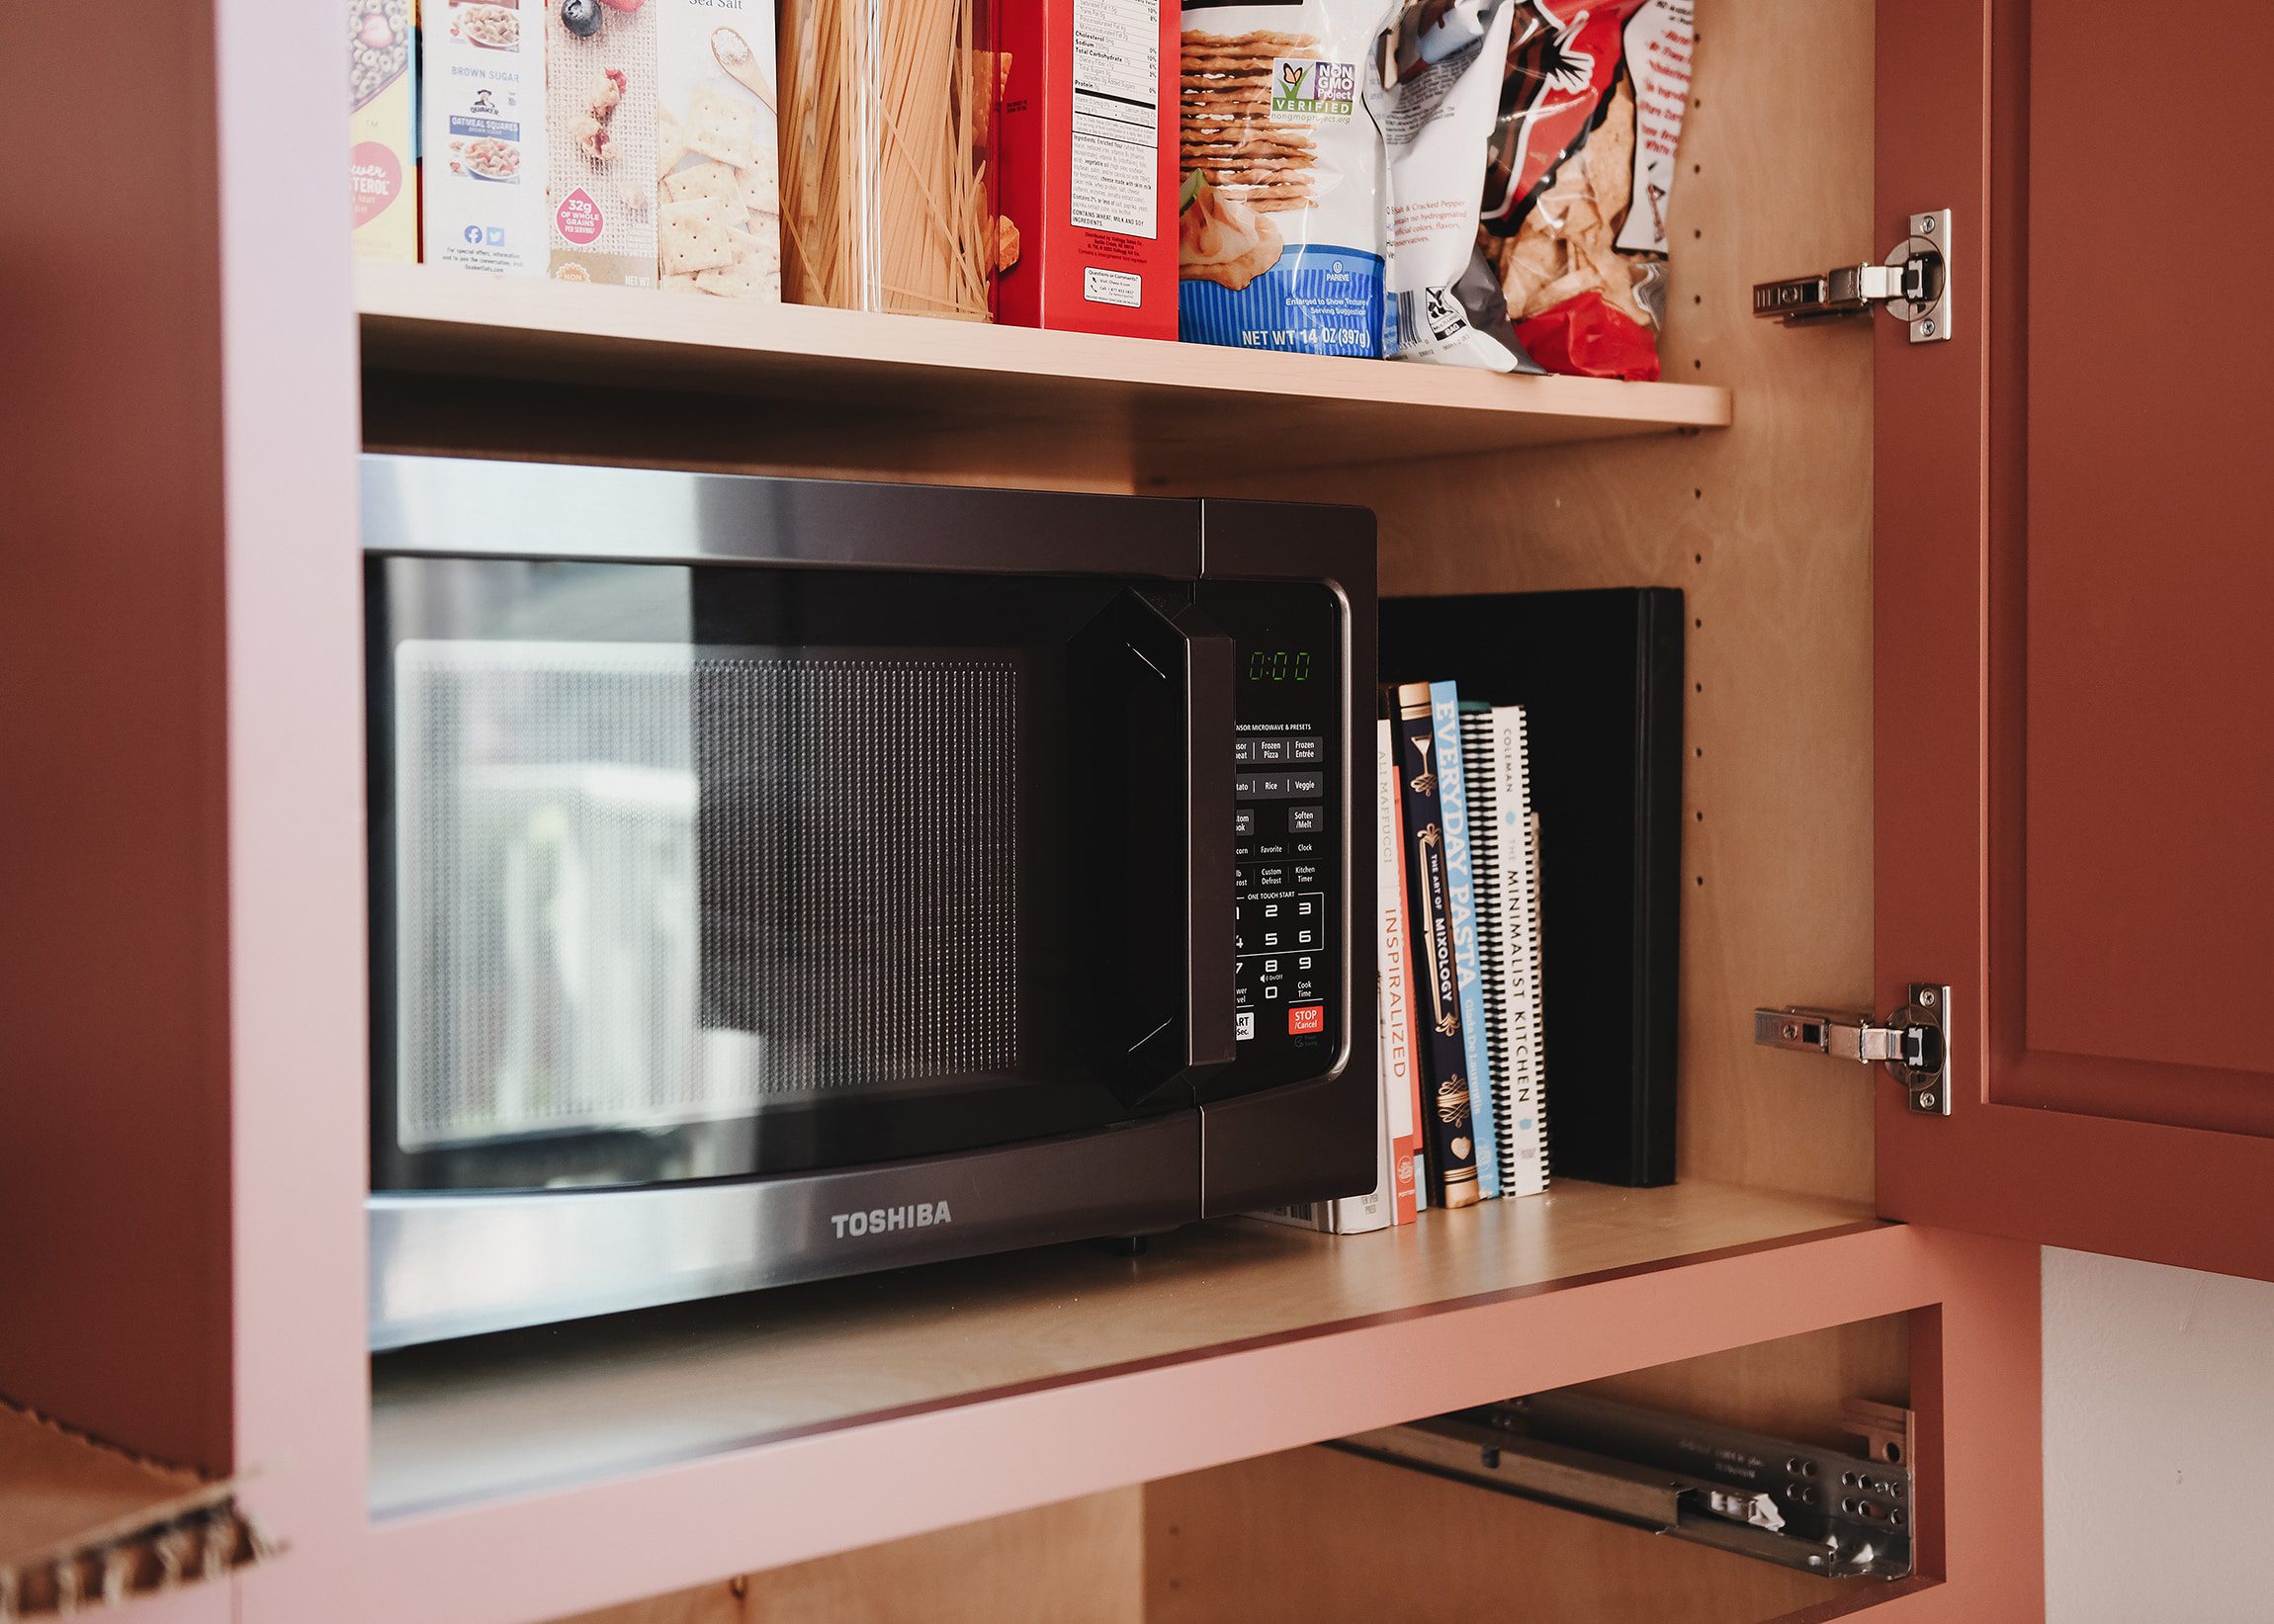 Our microwave, tucked into the pantry | How we've gotten by for 2 months without a working kitchen | via Yellow Brick Home